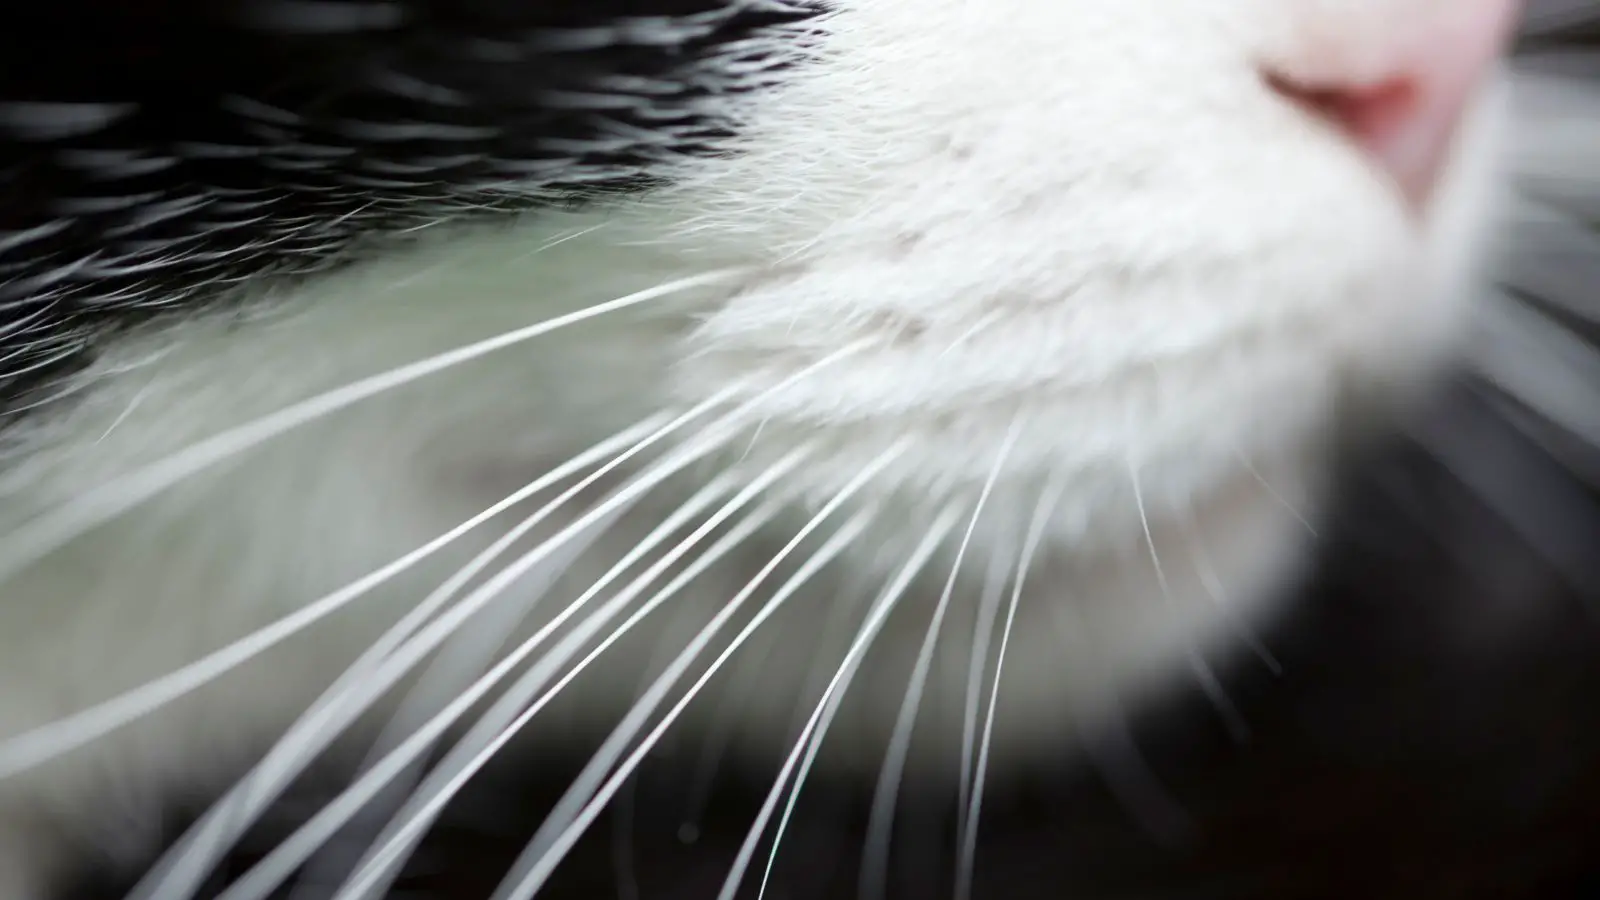 Cat whiskers - abouteverythingpets.com